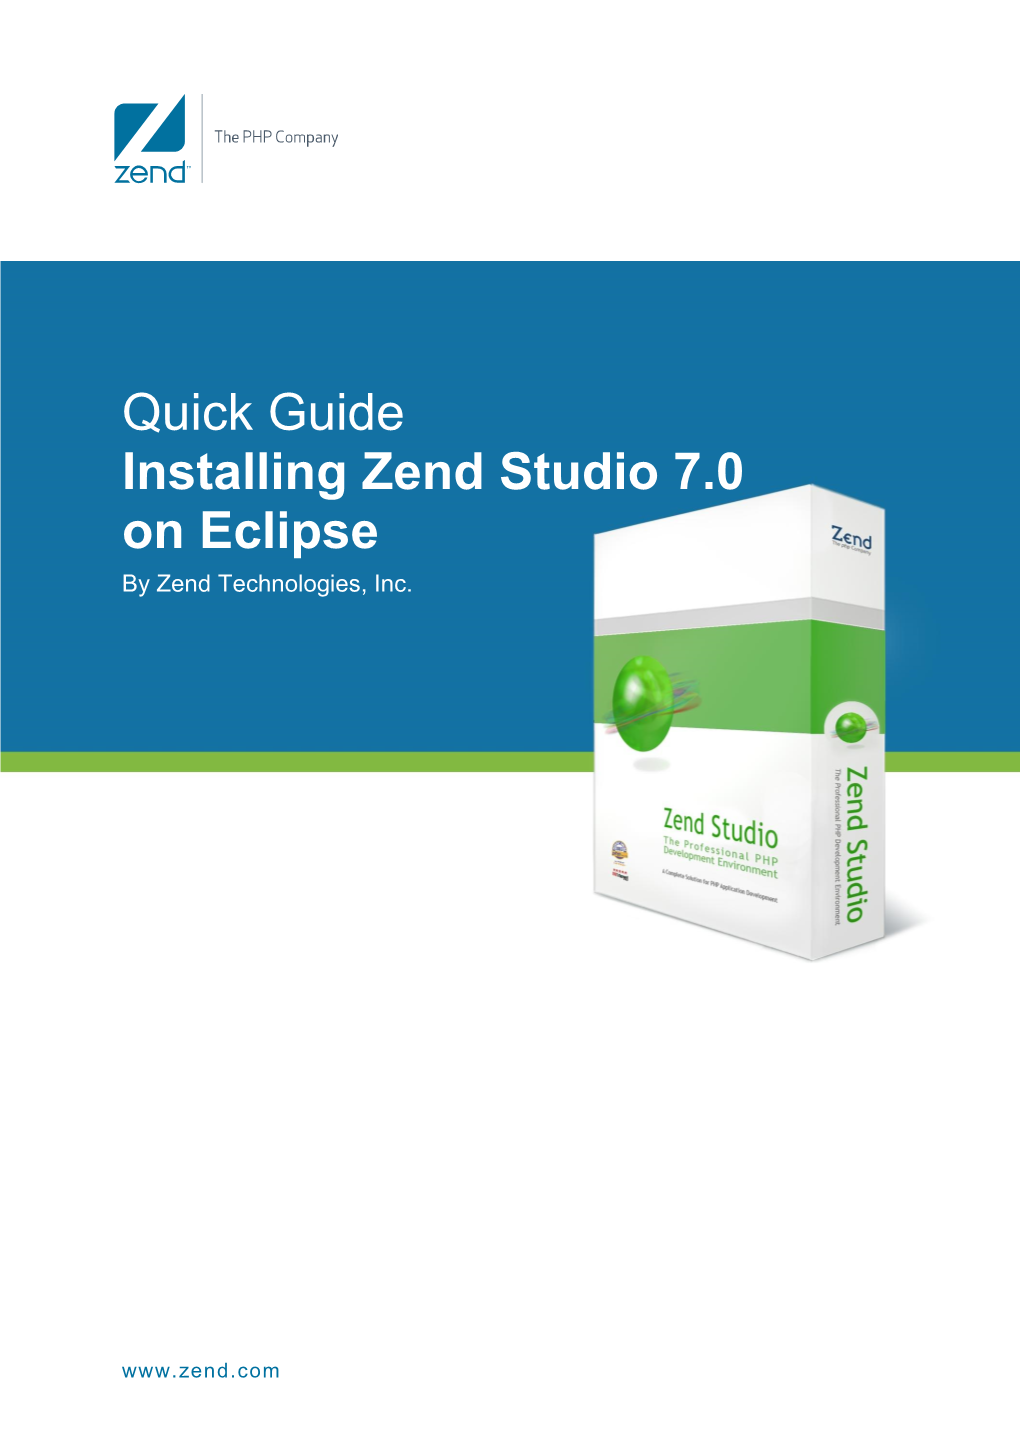 Quick Guide Installing Zend Studio 7.0 on Eclipse by Zend Technologies, Inc